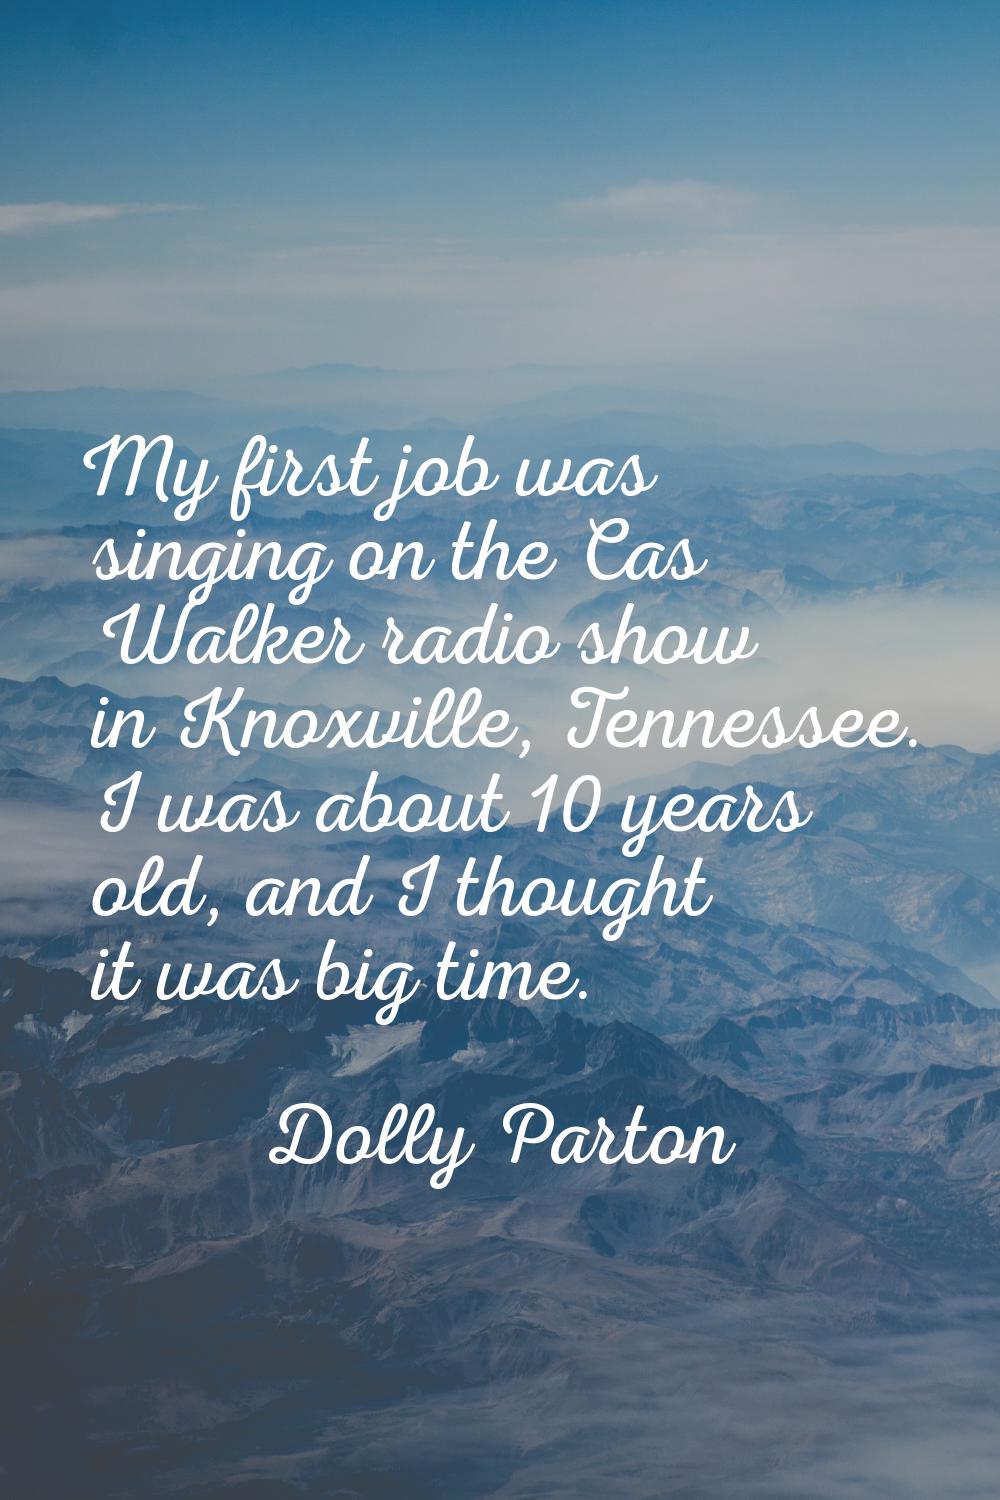 My first job was singing on the Cas Walker radio show in Knoxville, Tennessee. I was about 10 years